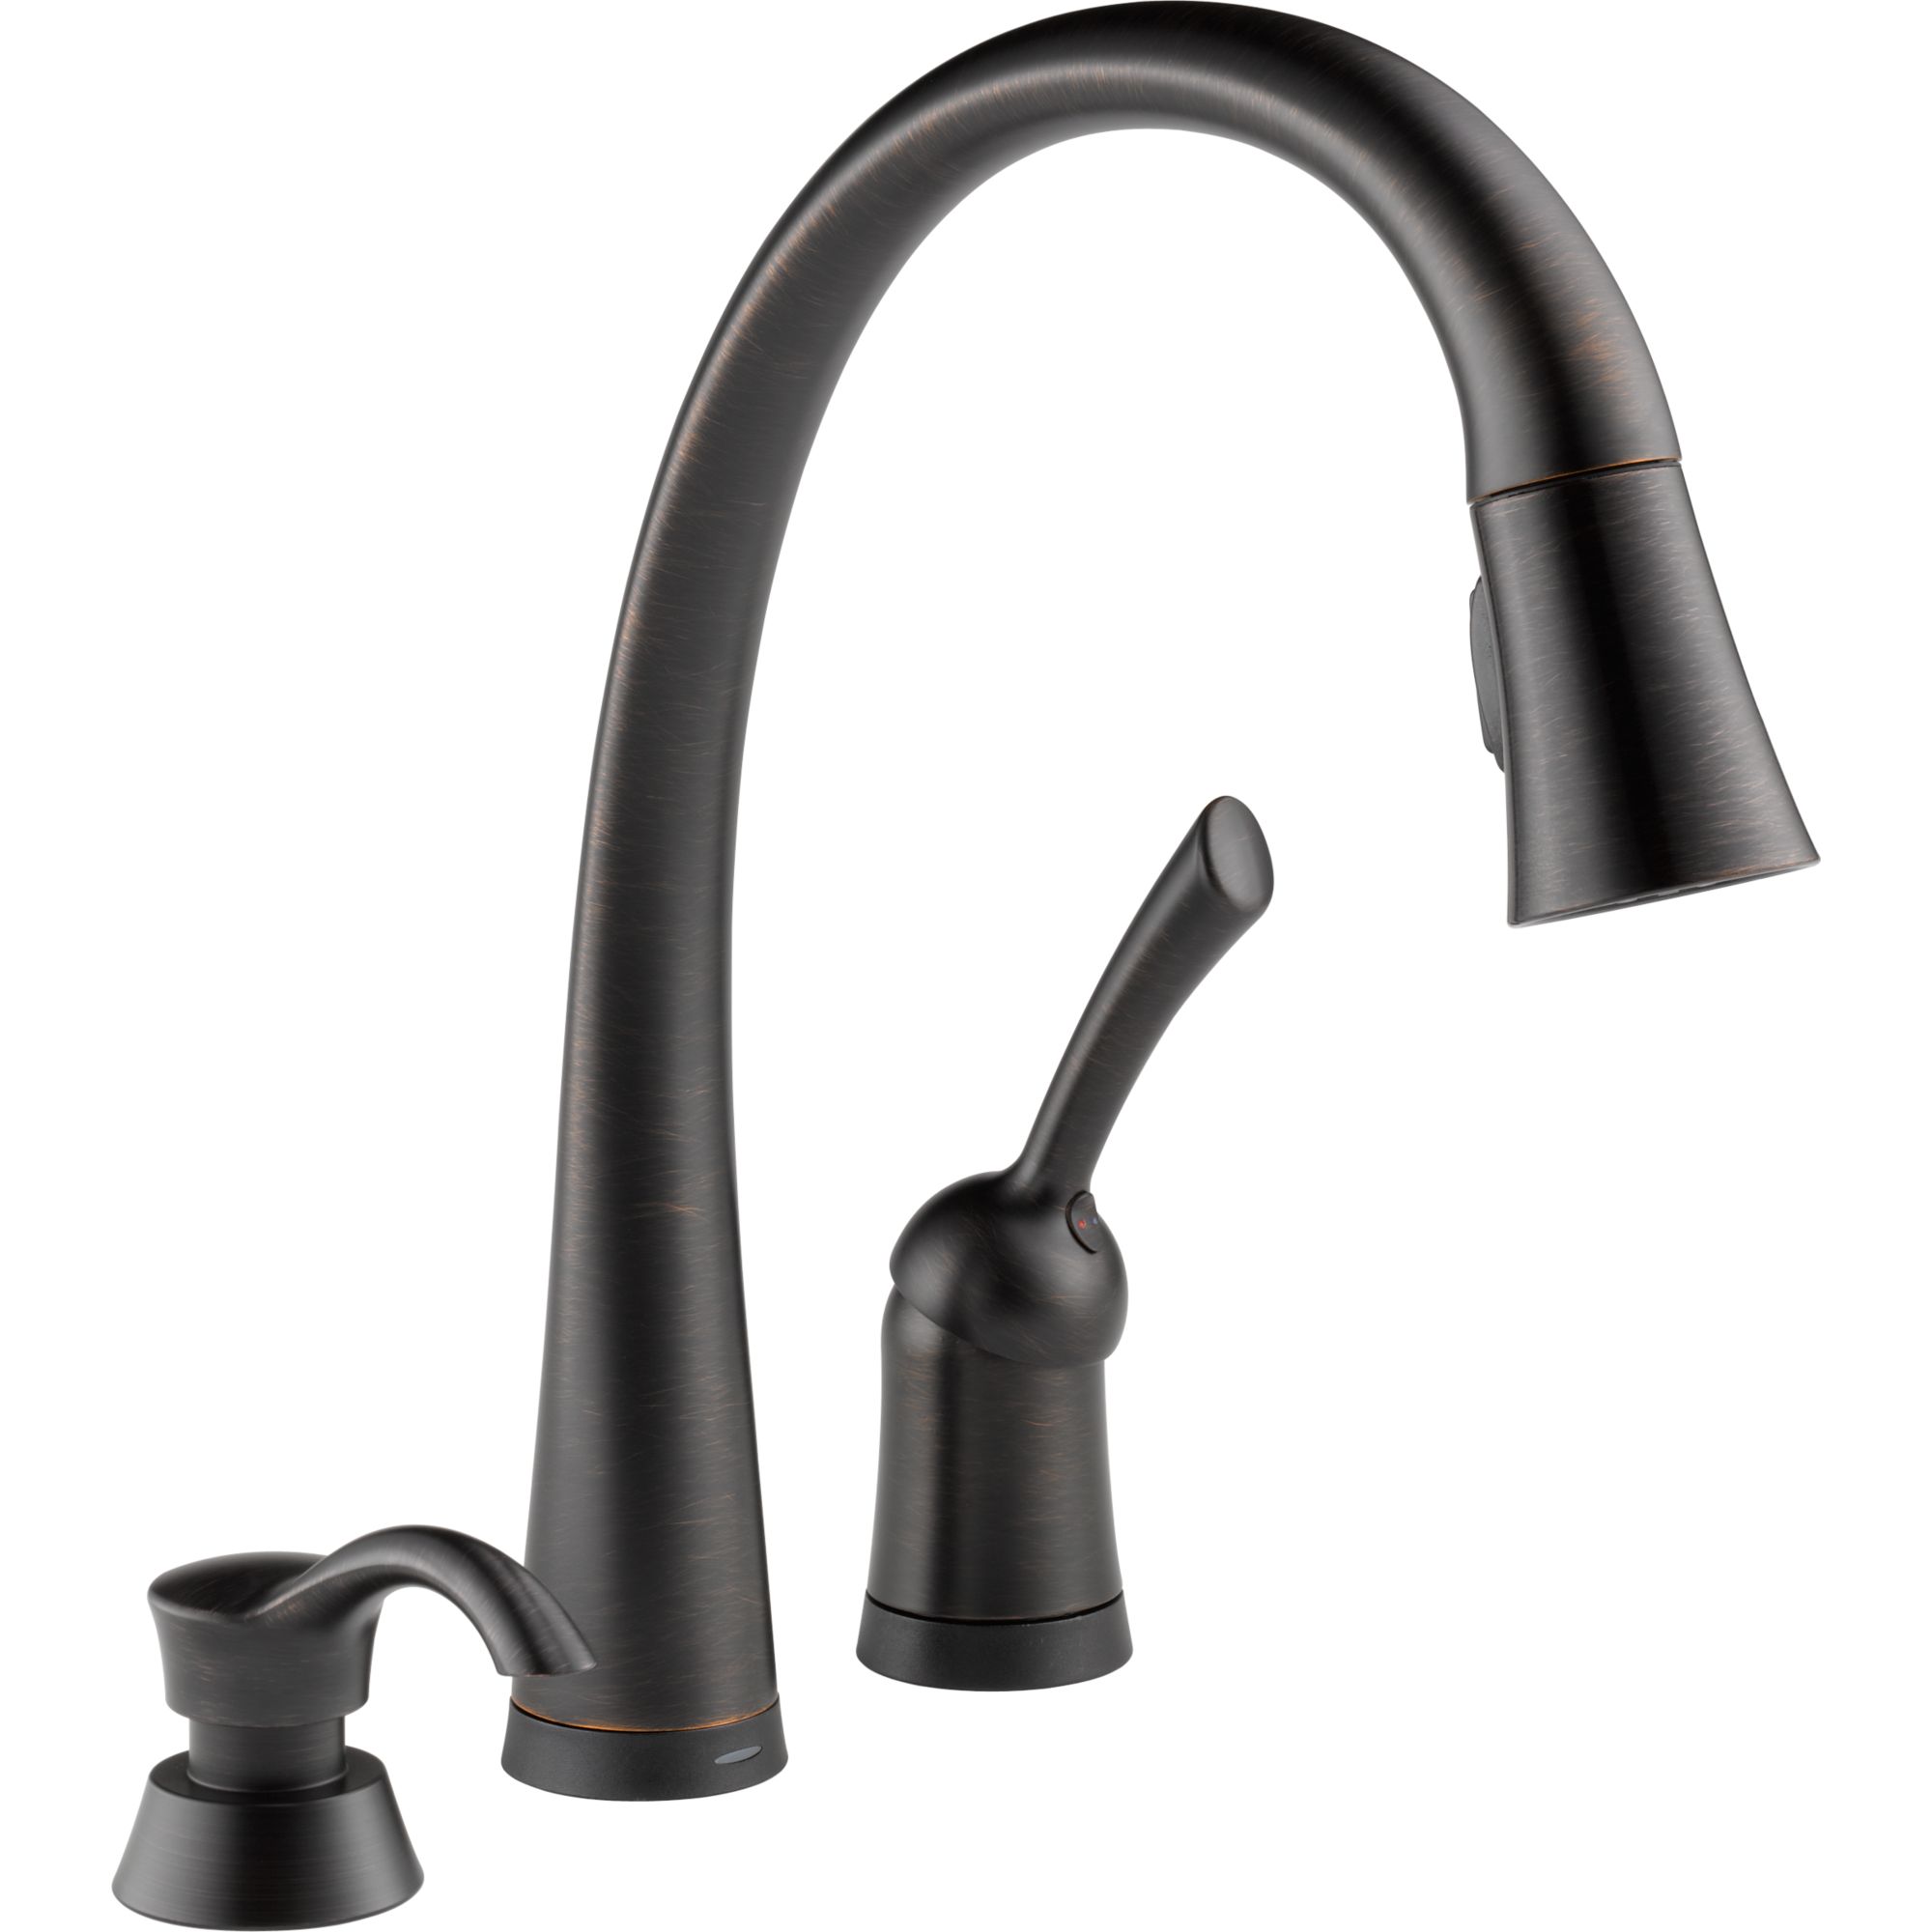 Delta 980T-RBSD-DST Pilar Single-handle Pull-down Kitchen Faucet with Touch2O Technology and Soap Dispenser Venetian Bronze